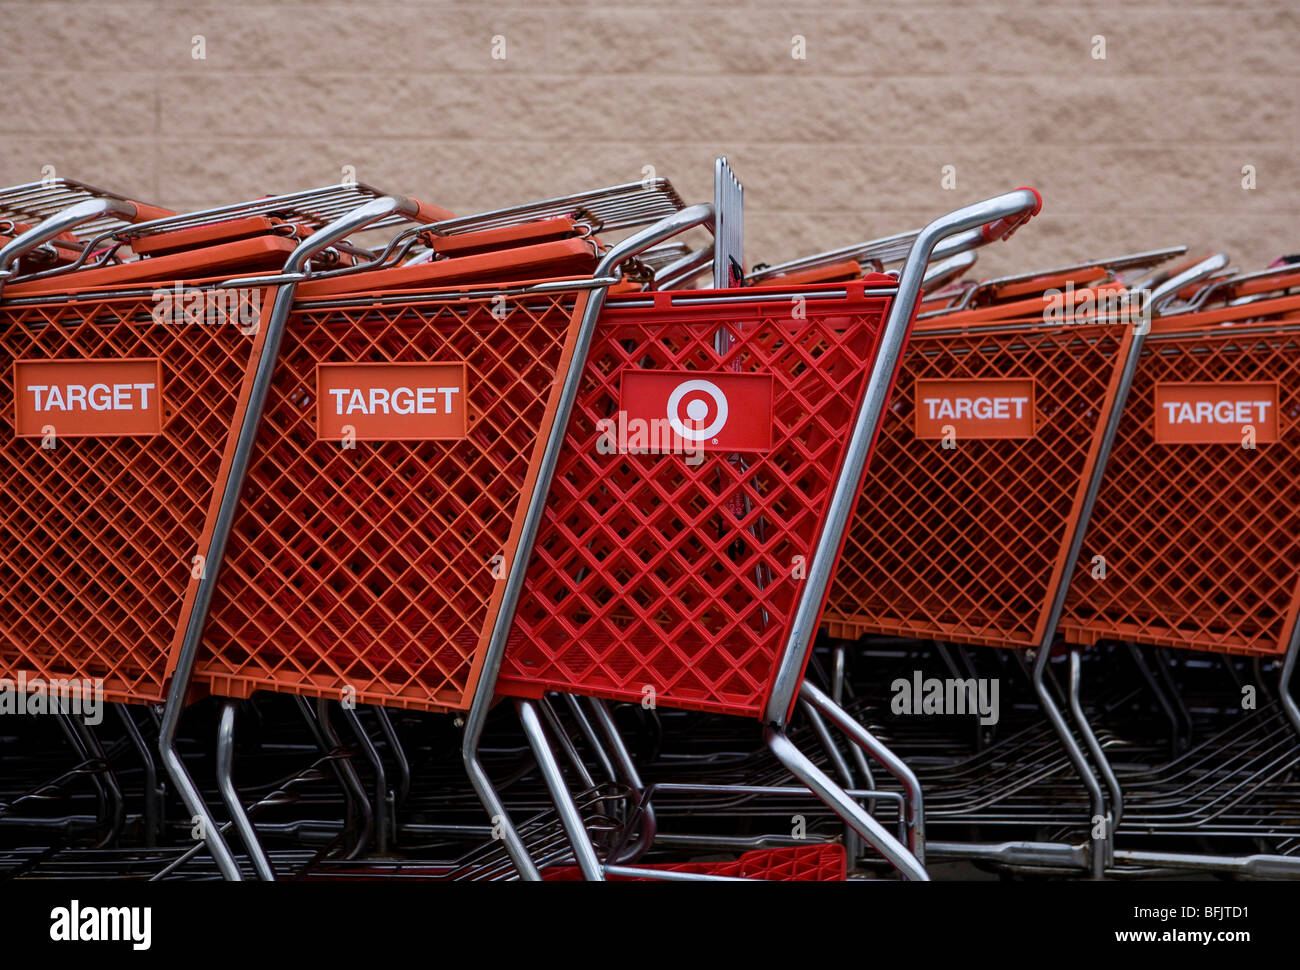 A Target retail location in suburban Maryland.  Stock Photo